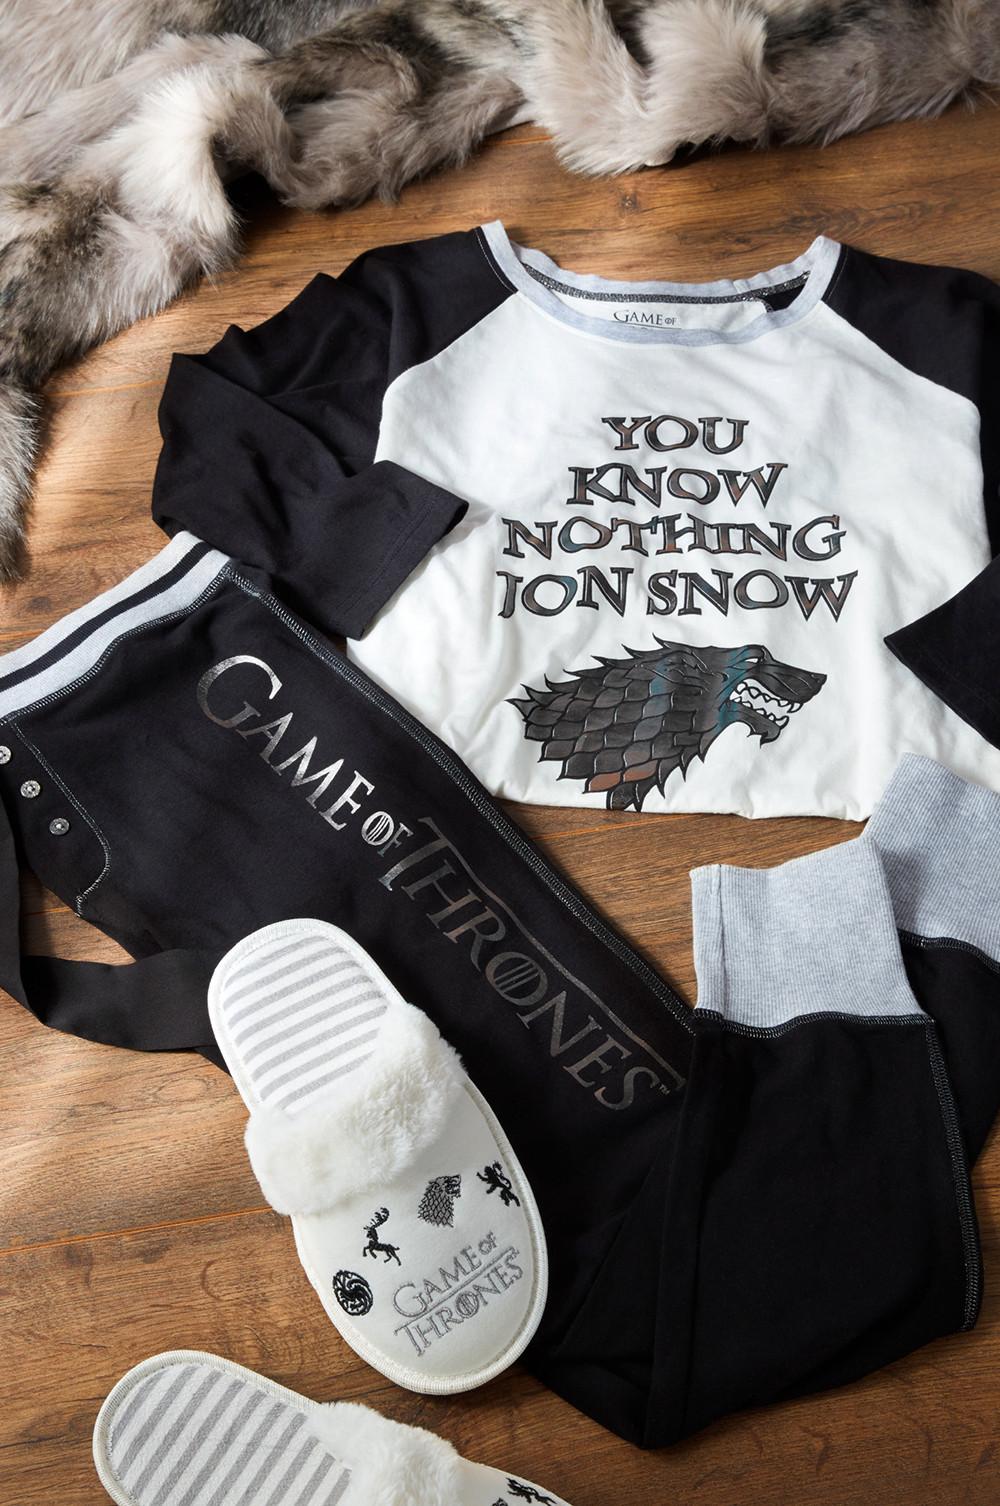 game-of-thrones-home-collection